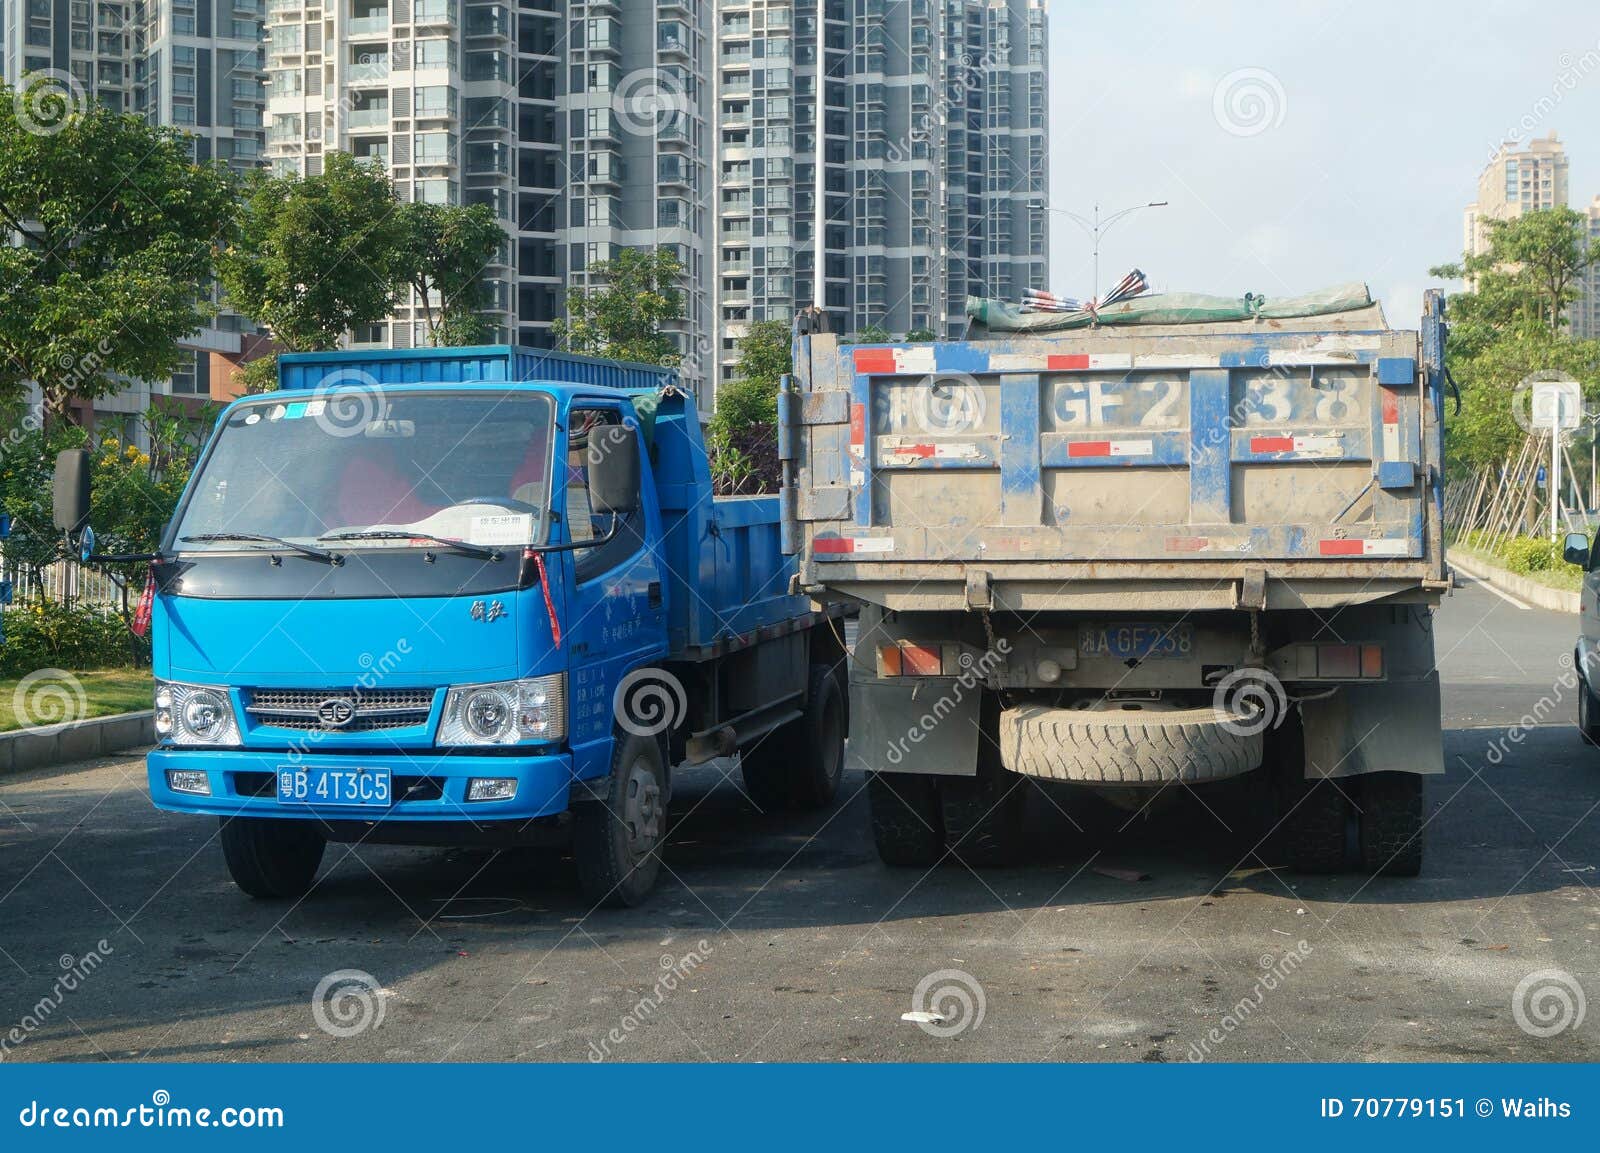 Parked Trucks On The Road Editorial Photo Image Of Parking 70779151